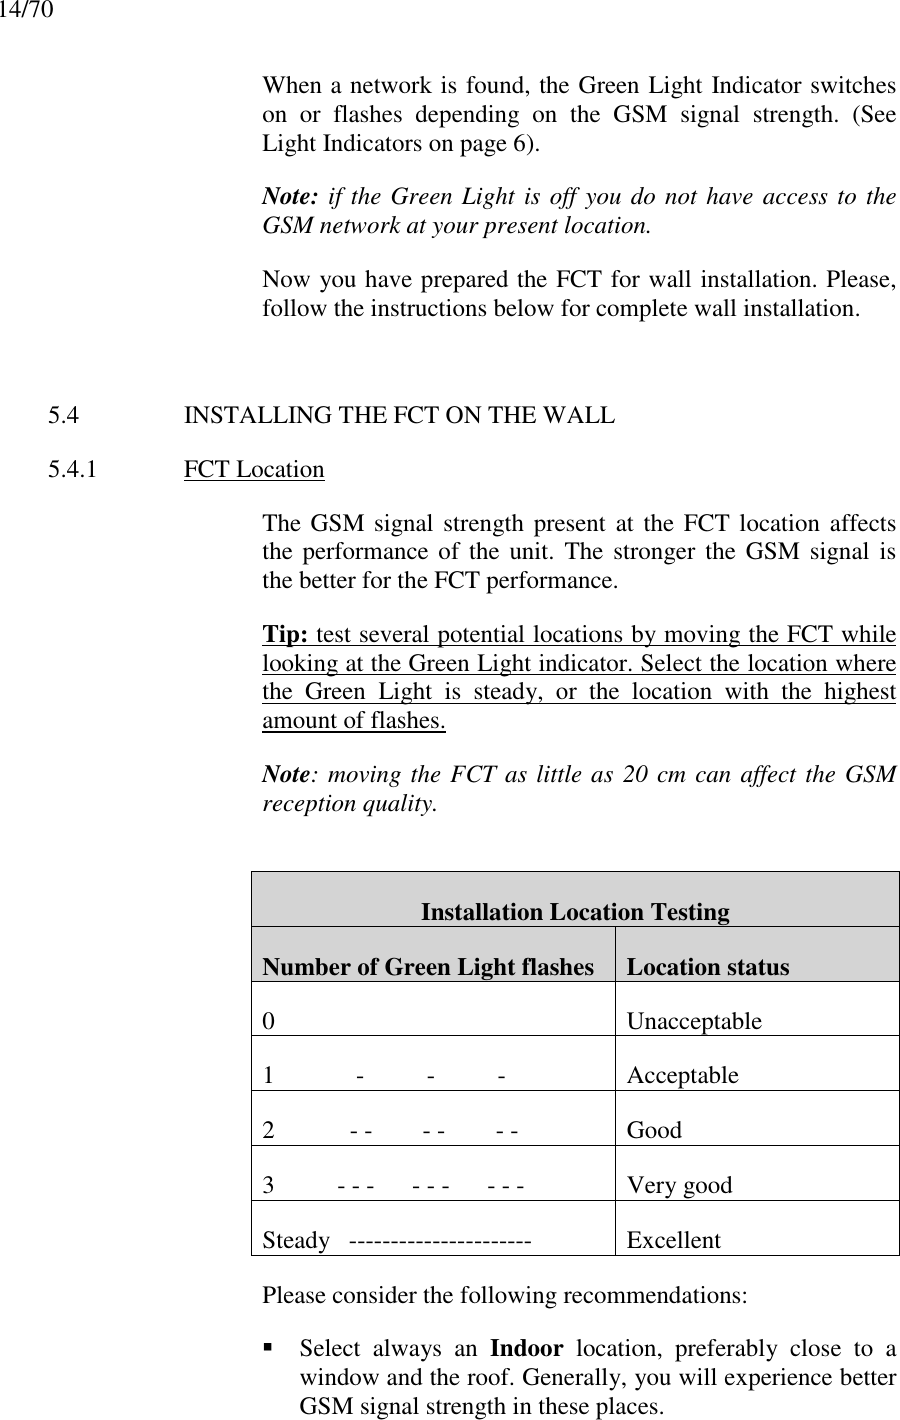 14/70When a network is found, the Green Light Indicator switcheson or flashes depending on the GSM signal strength. (SeeLight Indicators on page 6).Note: if the Green Light is off you do not have access to theGSM network at your present location.Now you have prepared the FCT for wall installation. Please,follow the instructions below for complete wall installation.5.4 INSTALLING THE FCT ON THE WALL5.4.1 FCT LocationThe GSM signal strength present at the FCT location affectsthe performance of the unit. The stronger the GSM signal isthe better for the FCT performance.Tip: test several potential locations by moving the FCT whilelooking at the Green Light indicator. Select the location wherethe Green Light is steady, or the location with the highestamount of flashes.Note: moving the FCT as little as 20 cm can affect the GSMreception quality.Installation Location TestingNumber of Green Light flashes Location status0 Unacceptable1             -          -          - Acceptable2            - -        - -        - - Good3          - - -      - - -      - - - Very goodSteady   ---------------------- ExcellentPlease consider the following recommendations: Select always an Indoor location, preferably close to awindow and the roof. Generally, you will experience betterGSM signal strength in these places.